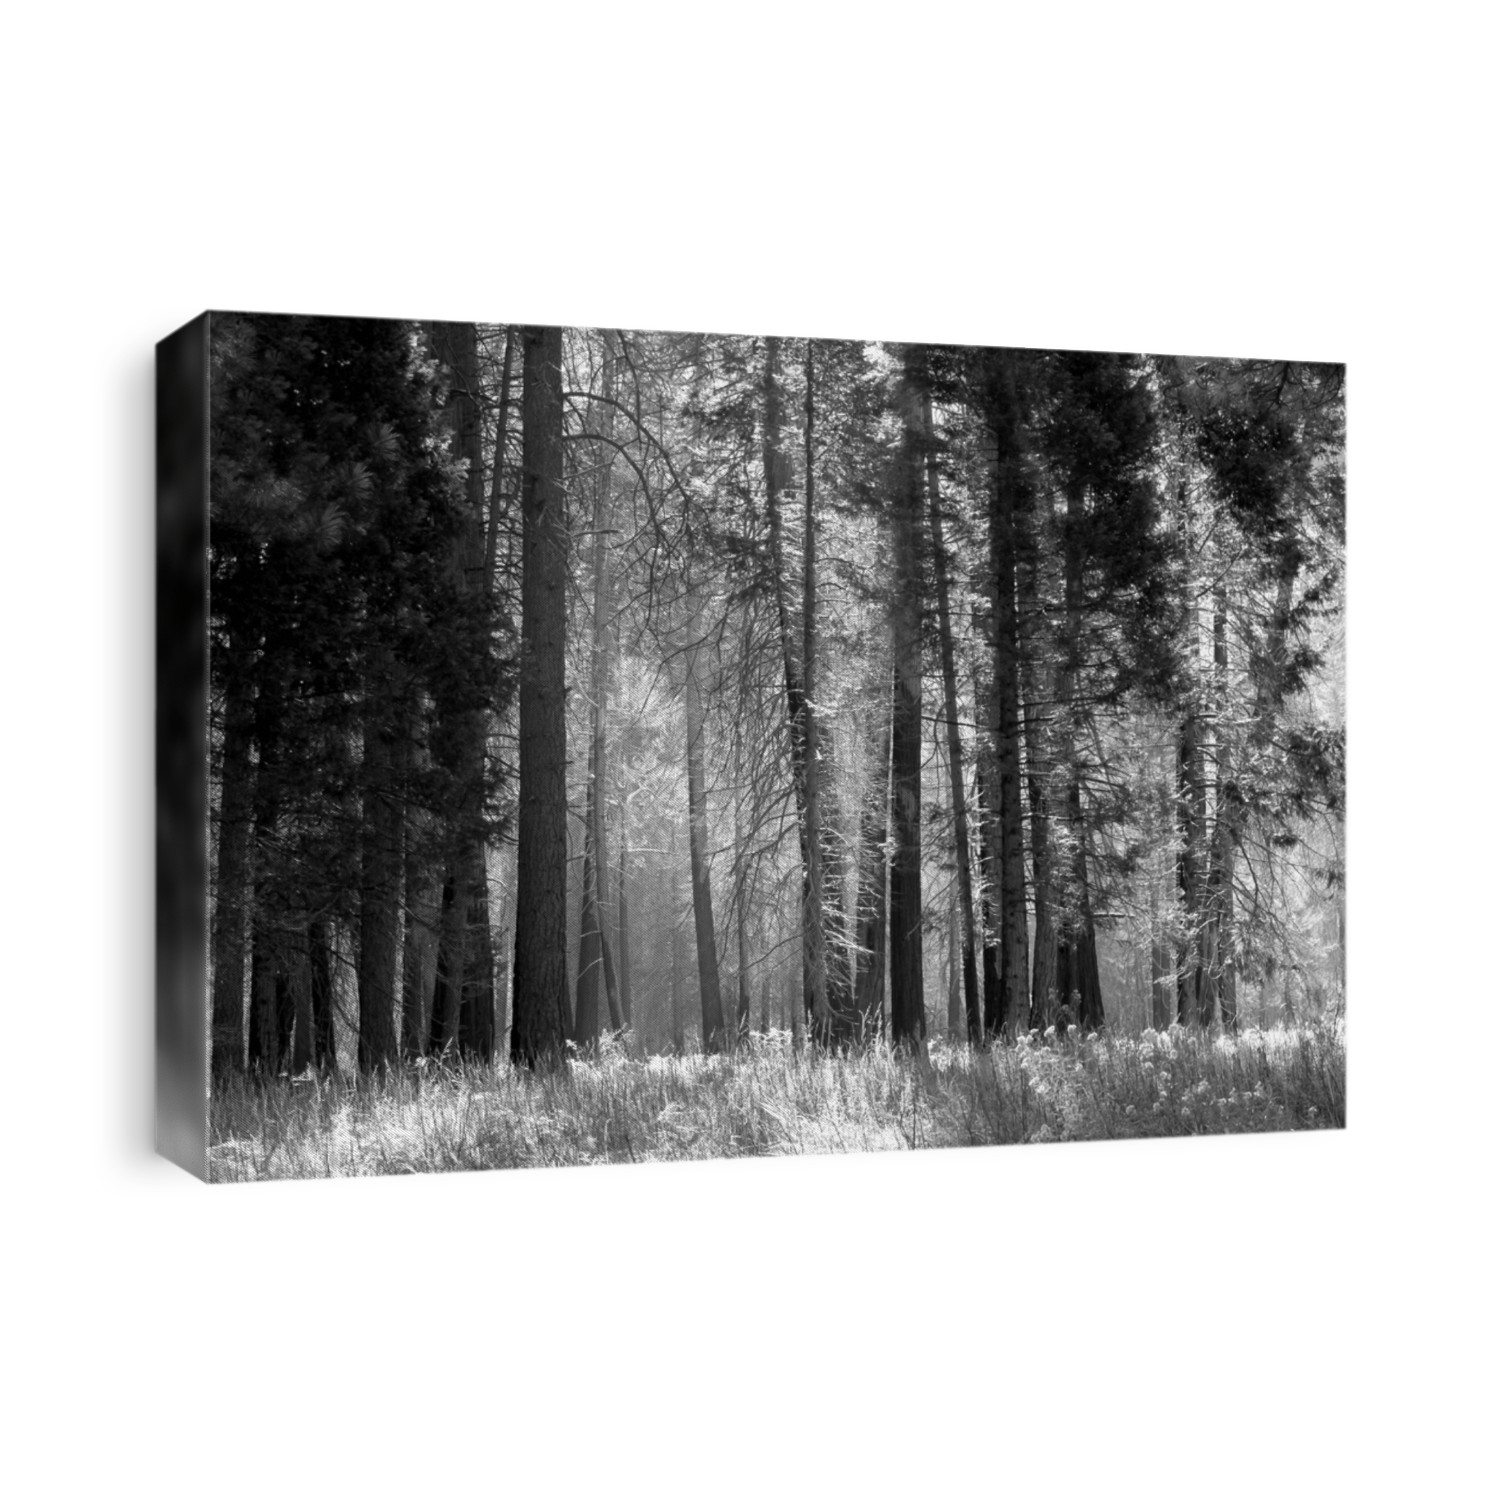 Black and white image of a forest with mist filtering through the trees